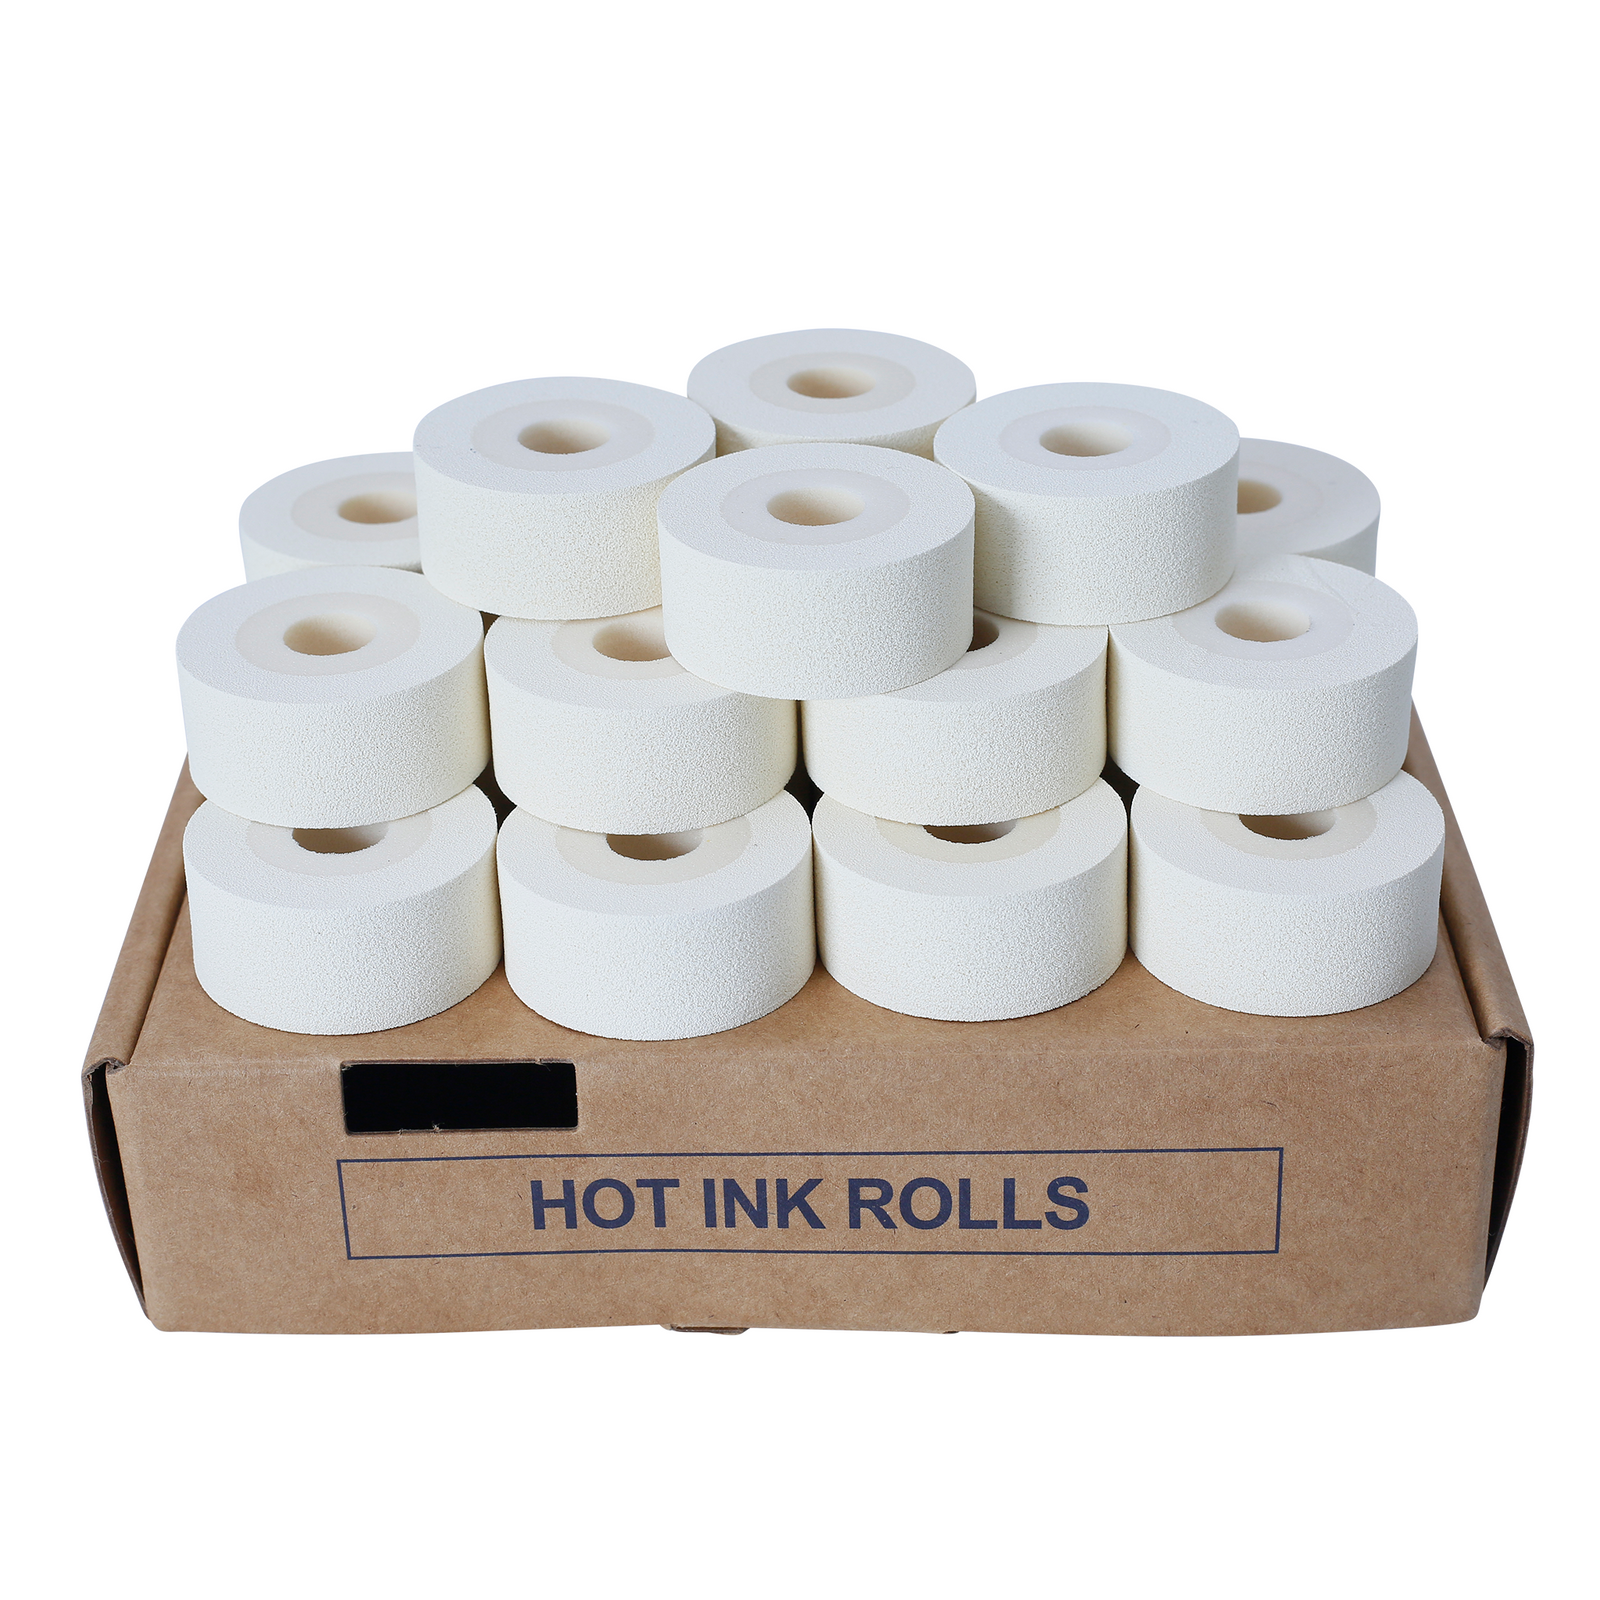 Pack of 24 rolls of 16mm white hot ink stamp rolls positioned on top of their original card box